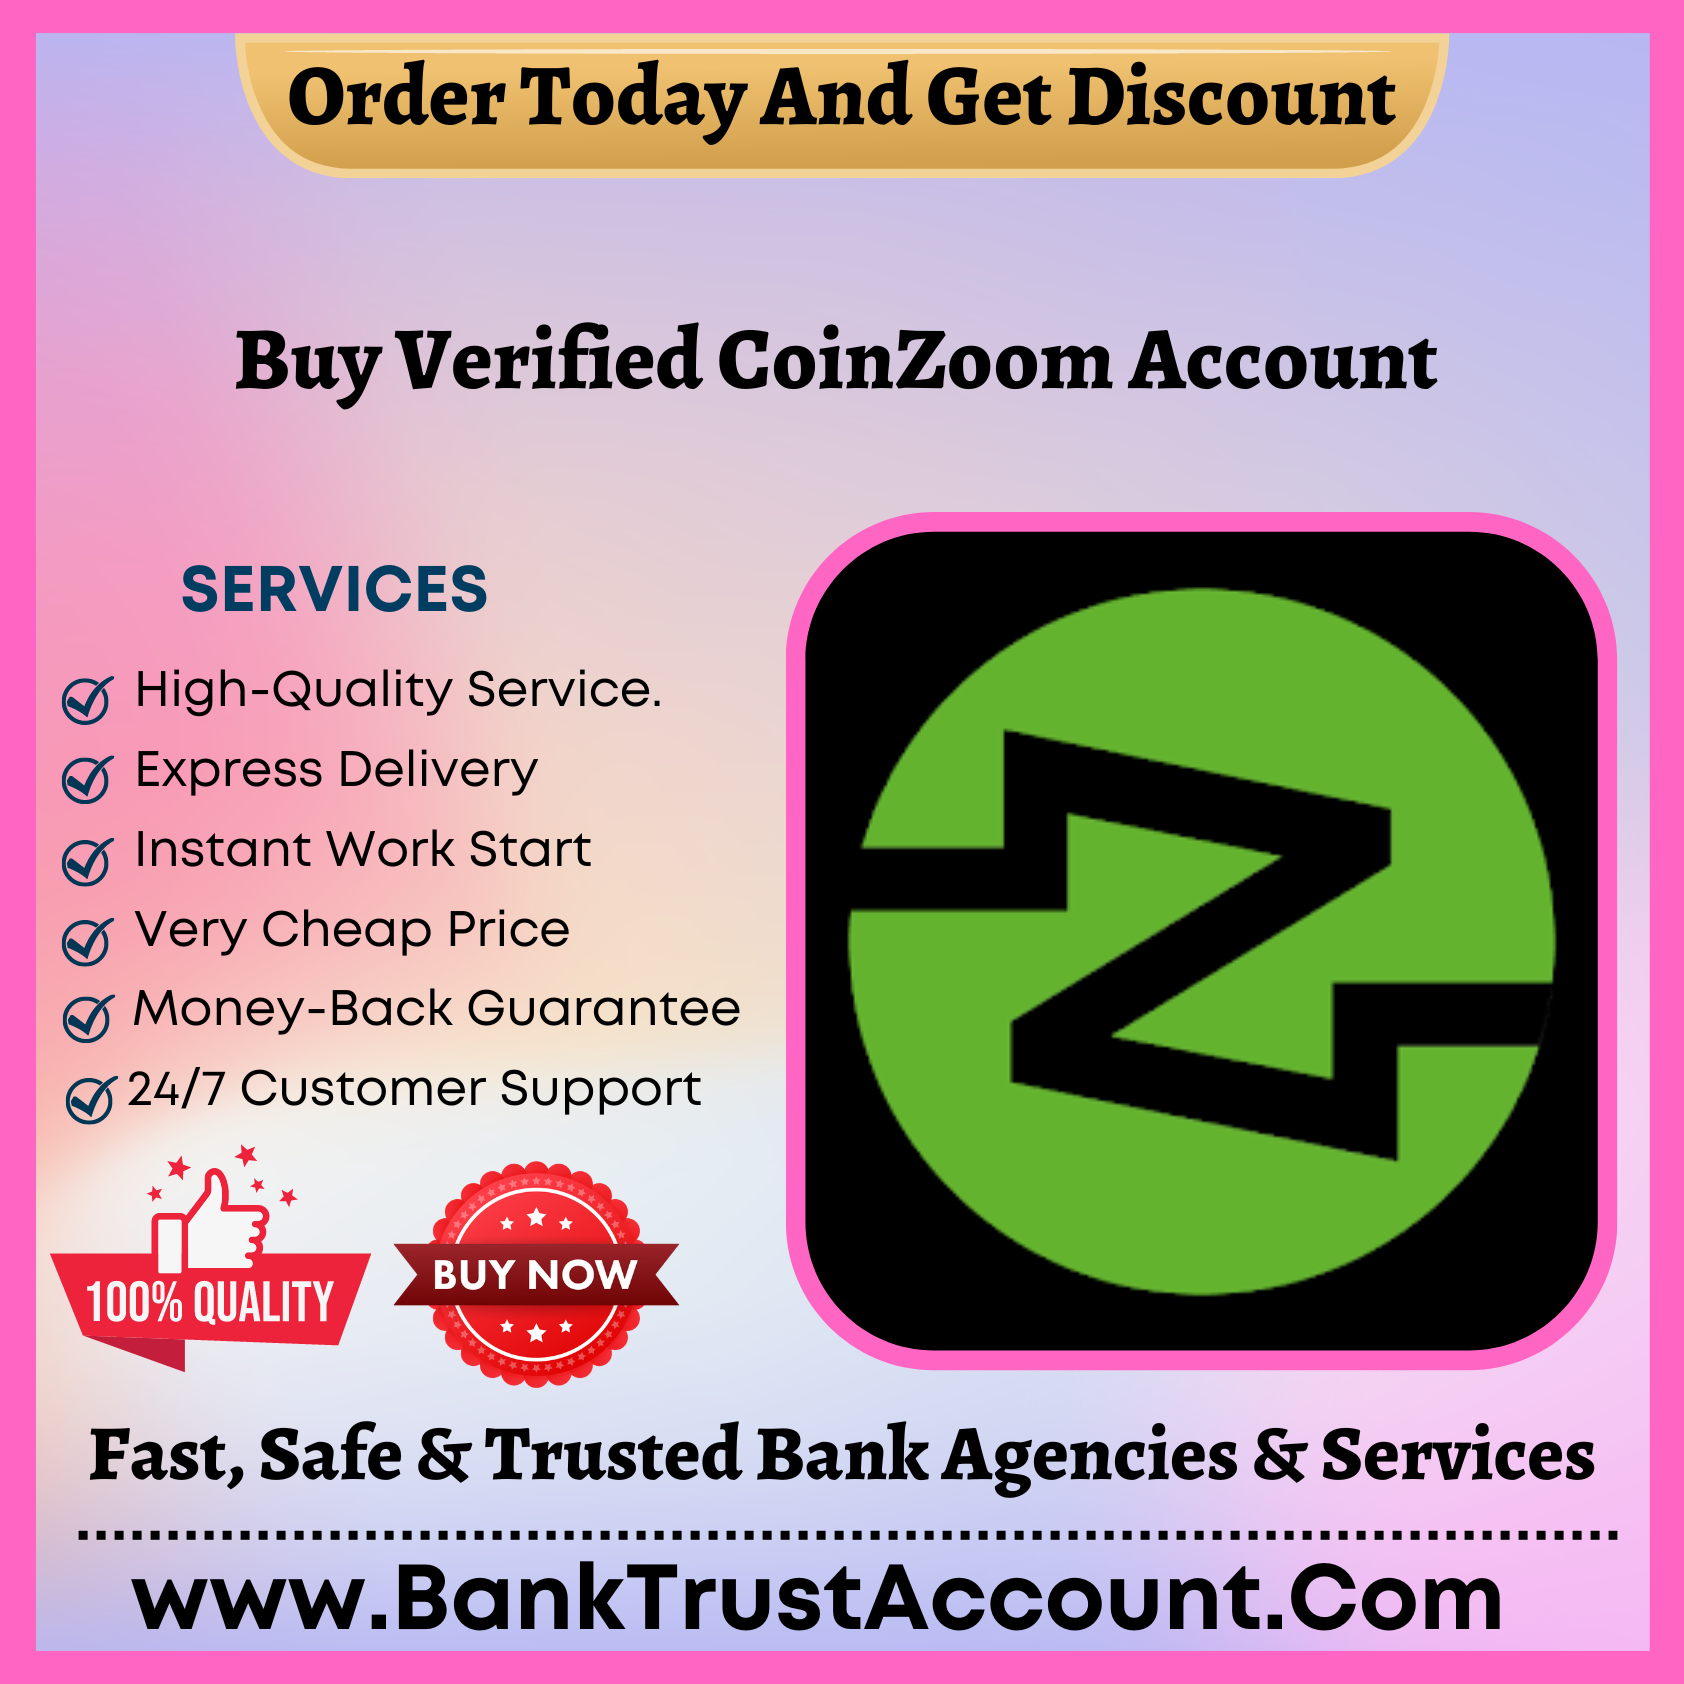 Buy Verified CoinZoom Account - 100% Verified Fast Delivery